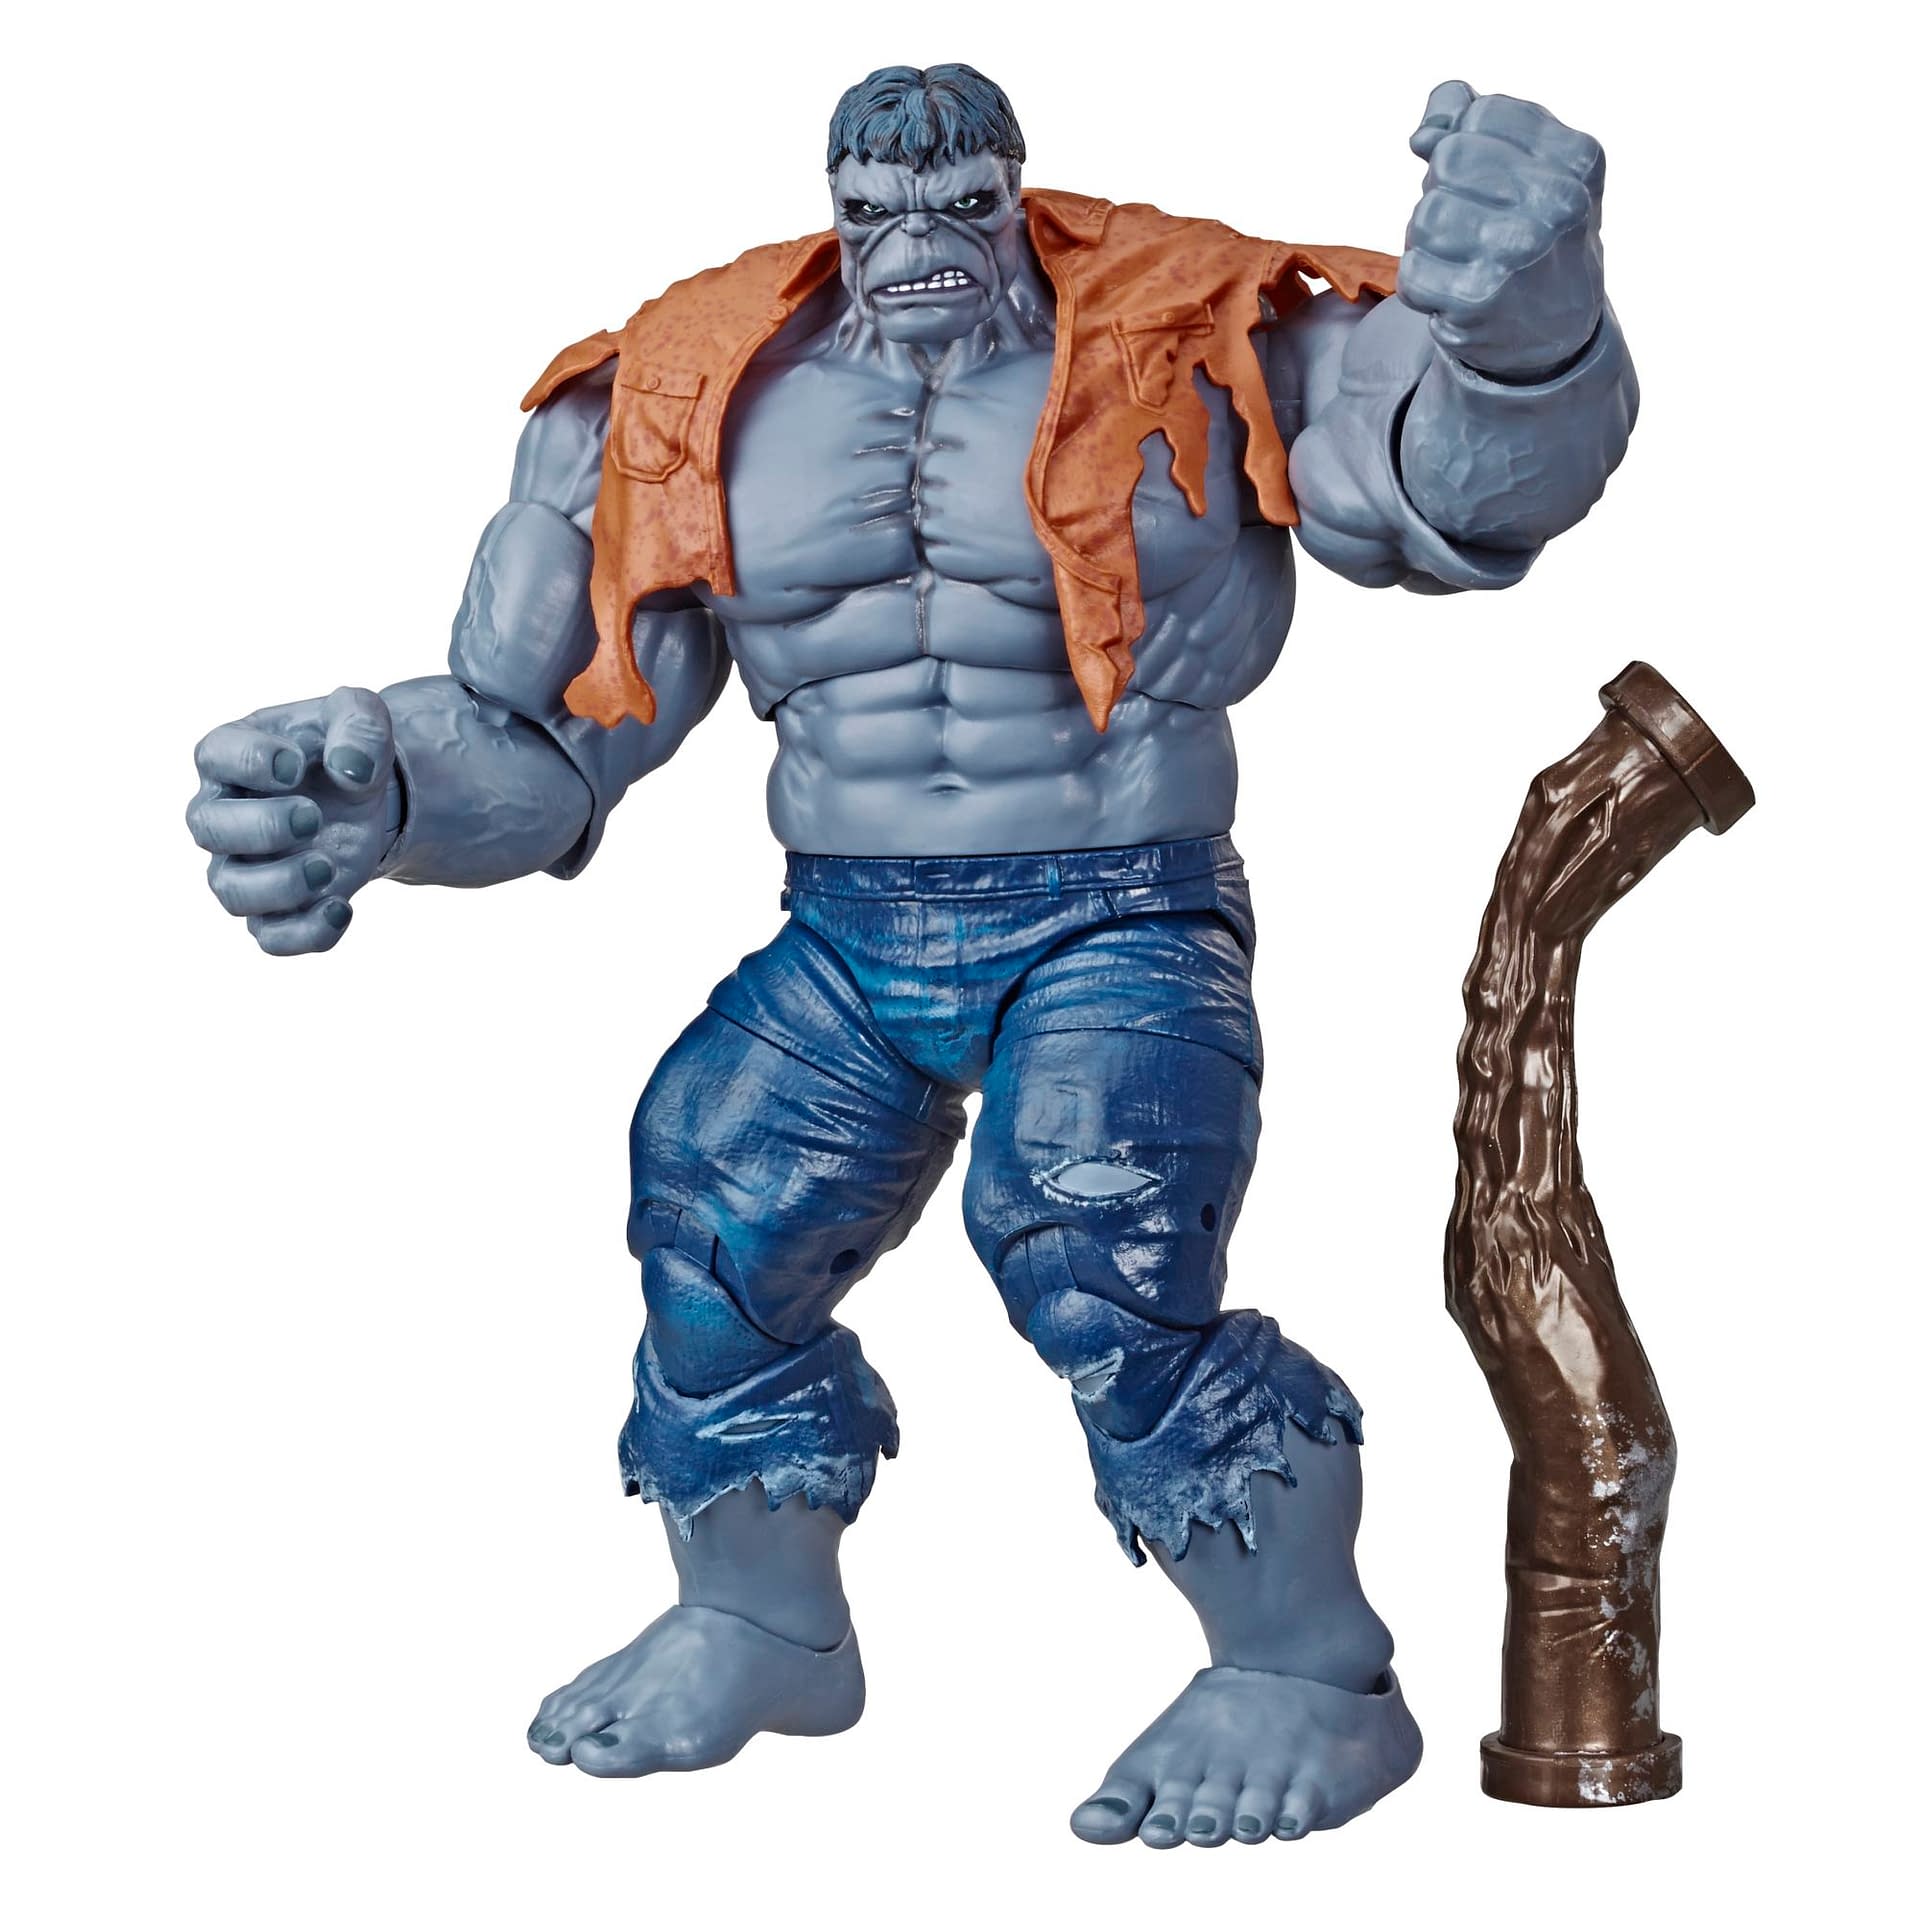 The Incredible Hulk Gets a European Convention Exclusive Figure